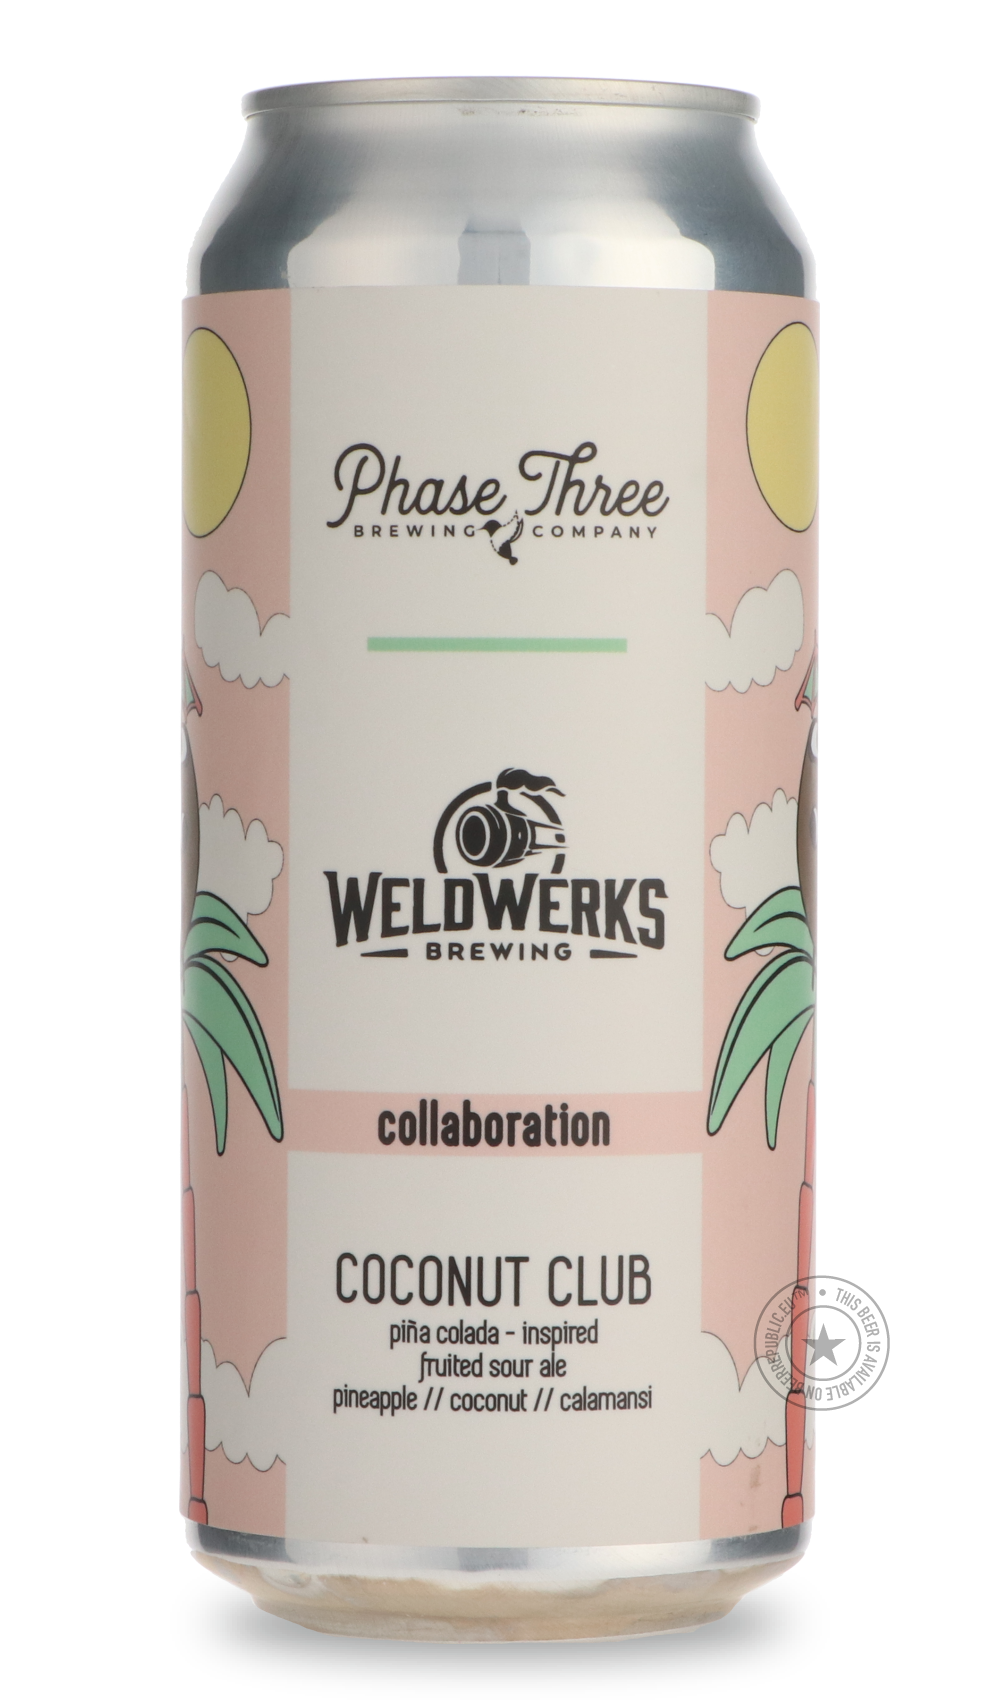 -Phase Three- Coconut Club / Weldwerks-Sour / Wild & Fruity- Only @ Beer Republic - The best online beer store for American & Canadian craft beer - Buy beer online from the USA and Canada - Bier online kopen - Amerikaans bier kopen - Craft beer store - Craft beer kopen - Amerikanisch bier kaufen - Bier online kaufen - Acheter biere online - IPA - Stout - Porter - New England IPA - Hazy IPA - Imperial Stout - Barrel Aged - Barrel Aged Imperial Stout - Brown - Dark beer - Blond - Blonde - Pilsner - Lager - Wh